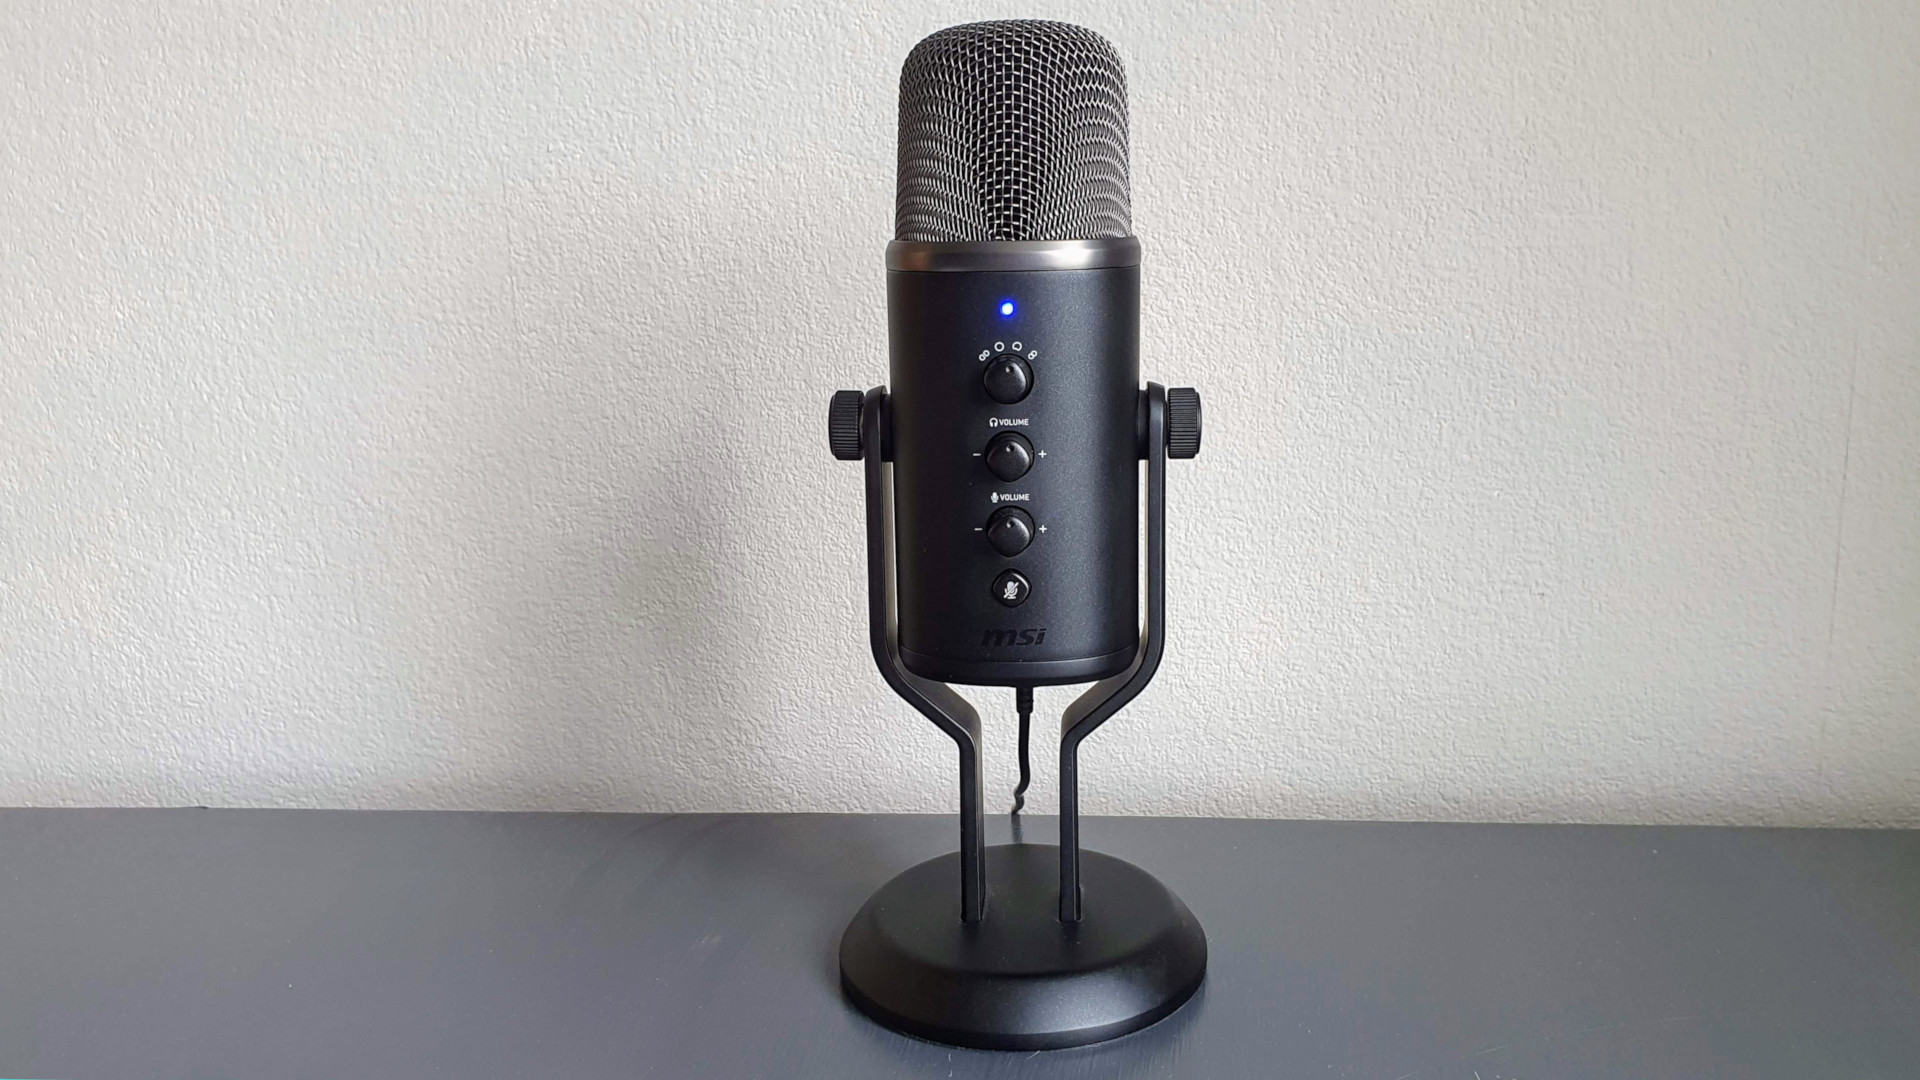 https://www.pcgamesn.com/wp-content/sites/pcgamesn/2022/06/msi-immerse-gv60-gaming-microphone-review-f.jpg